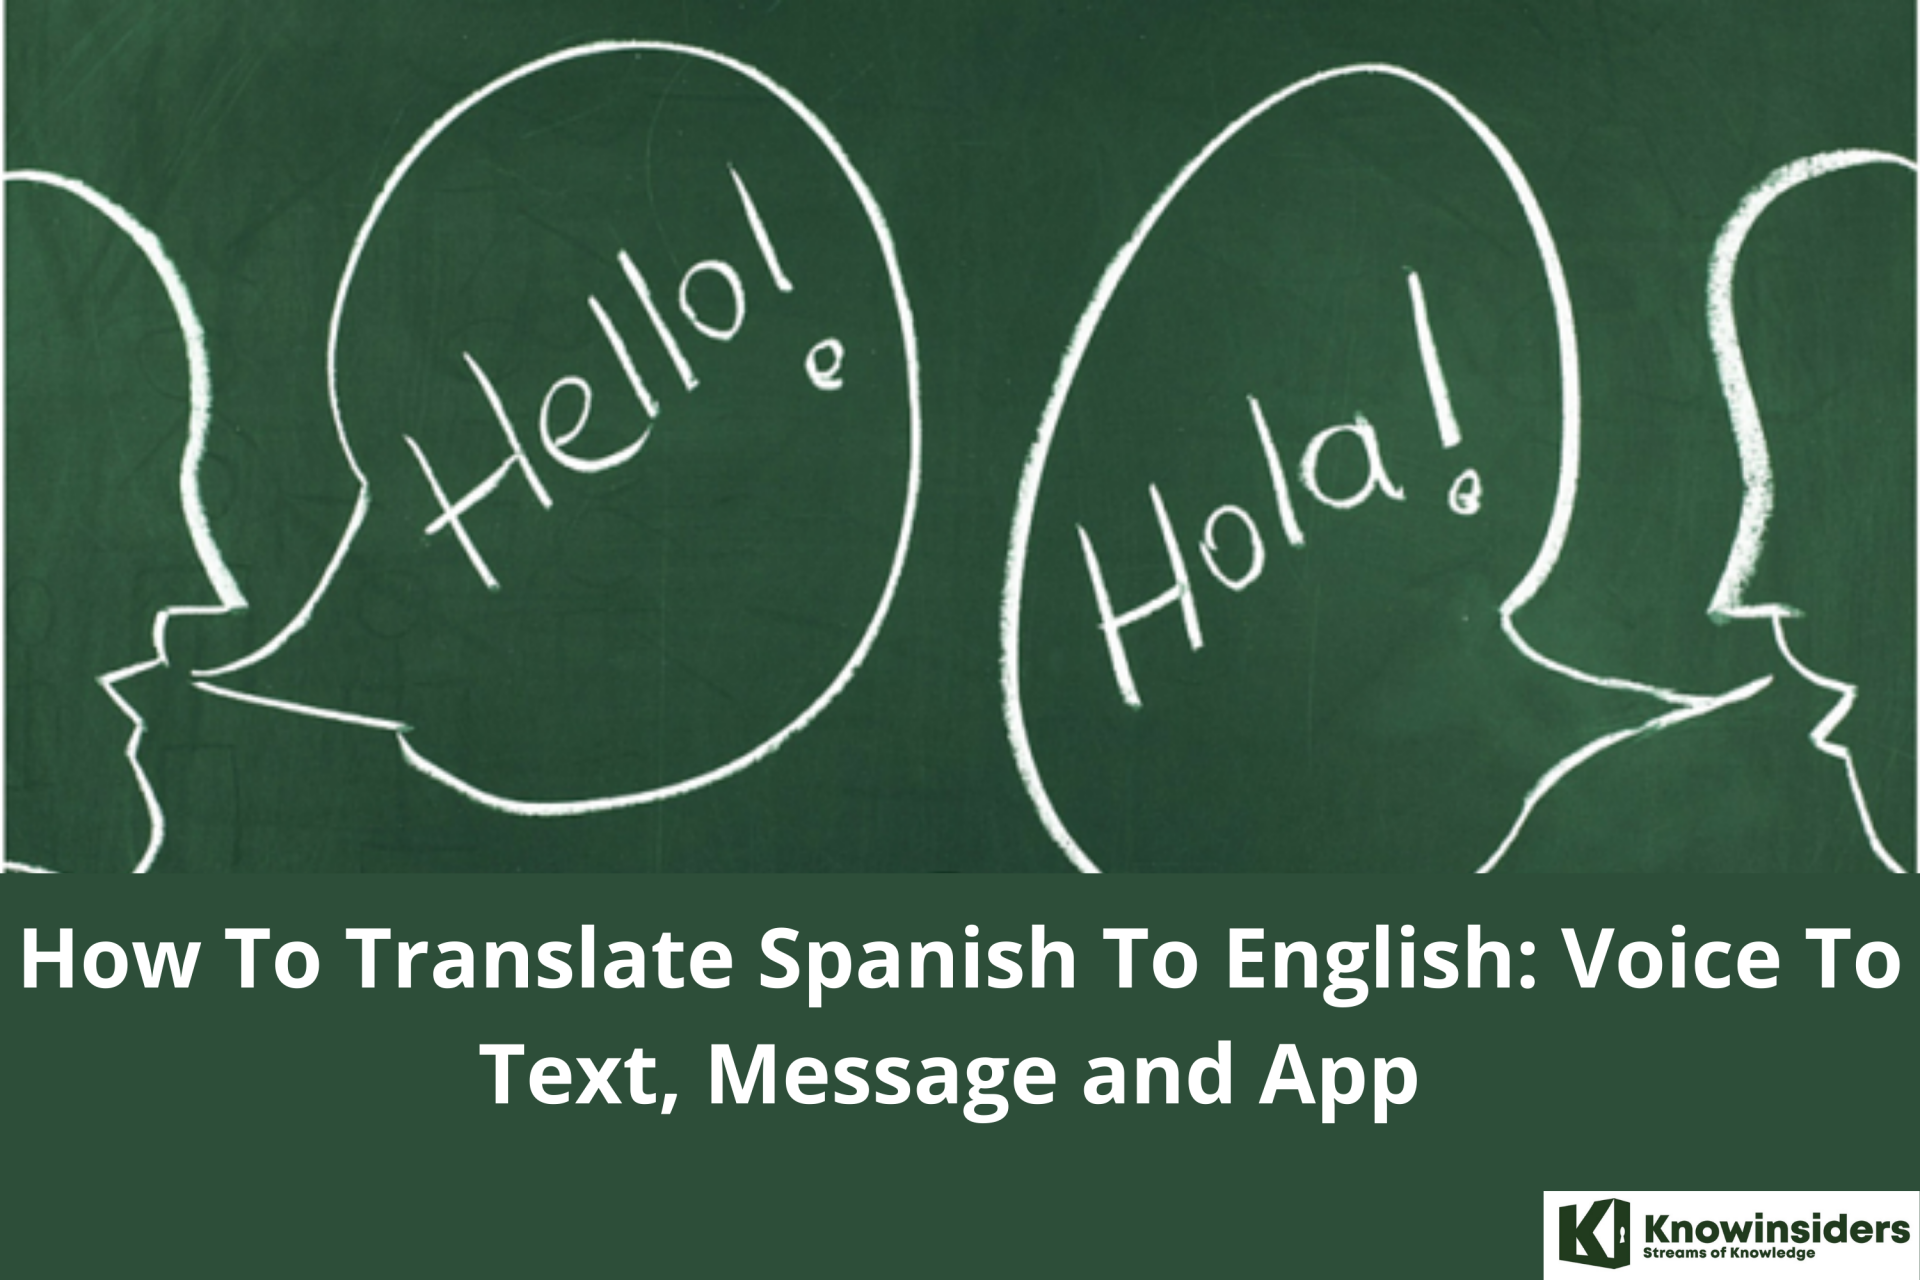 How To Translate Spanish To English: Voice To Text, Top 10 Apps and Offline